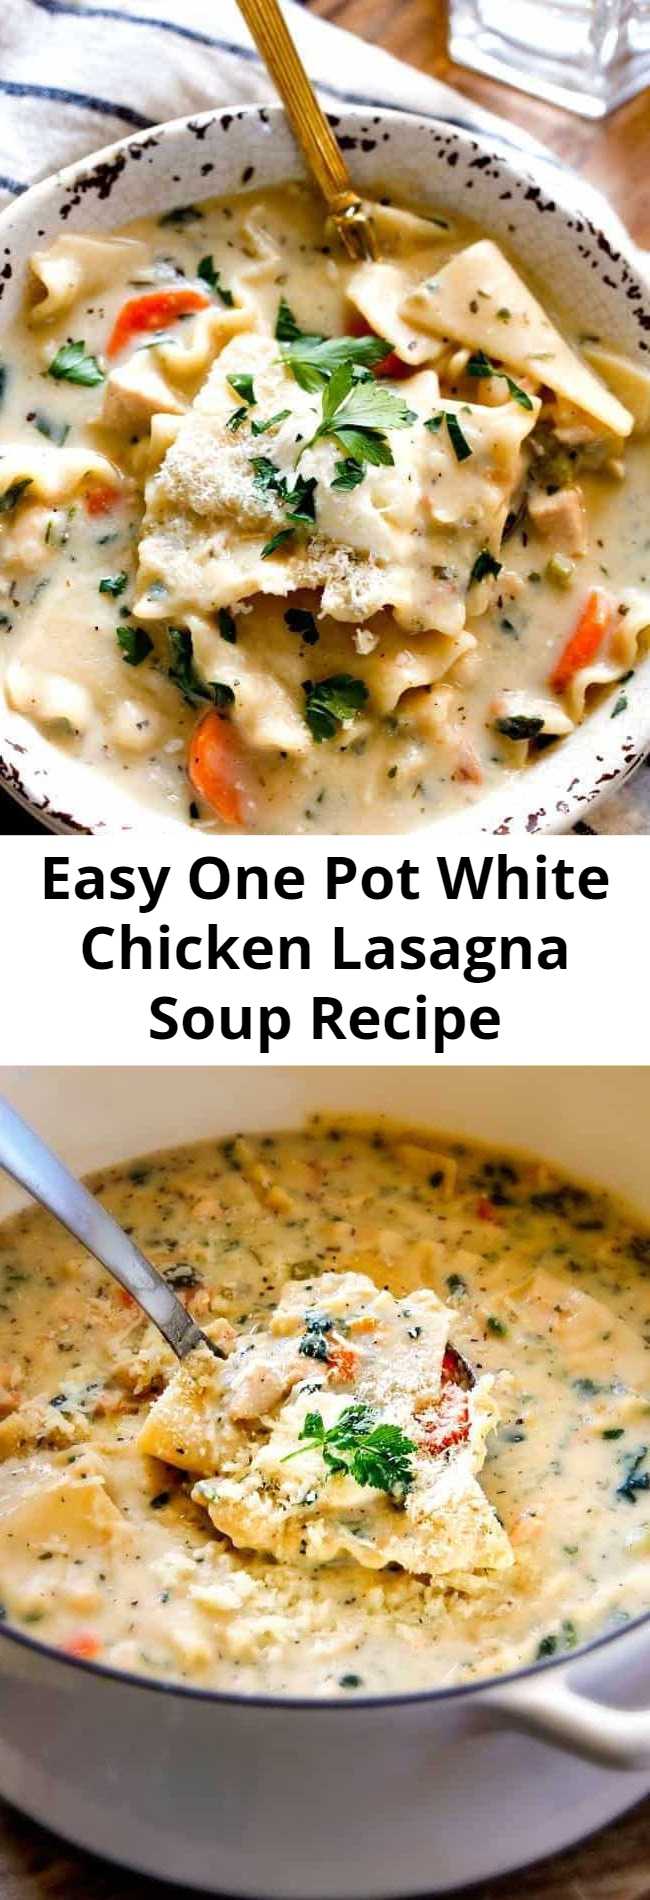 Easy One Pot White Chicken Lasagna Soup Recipe - This easy White Chicken Lasagna Soup tastes just like white chicken lasagna with cheesy layers of noodles smothered in velvety Italian spiced Parmesan infused sauce without all the layering or dishes! Simply saute chicken and veggies and dump in all ingredients and simmer away for a pot of velvety, slurpilicoius flavor!